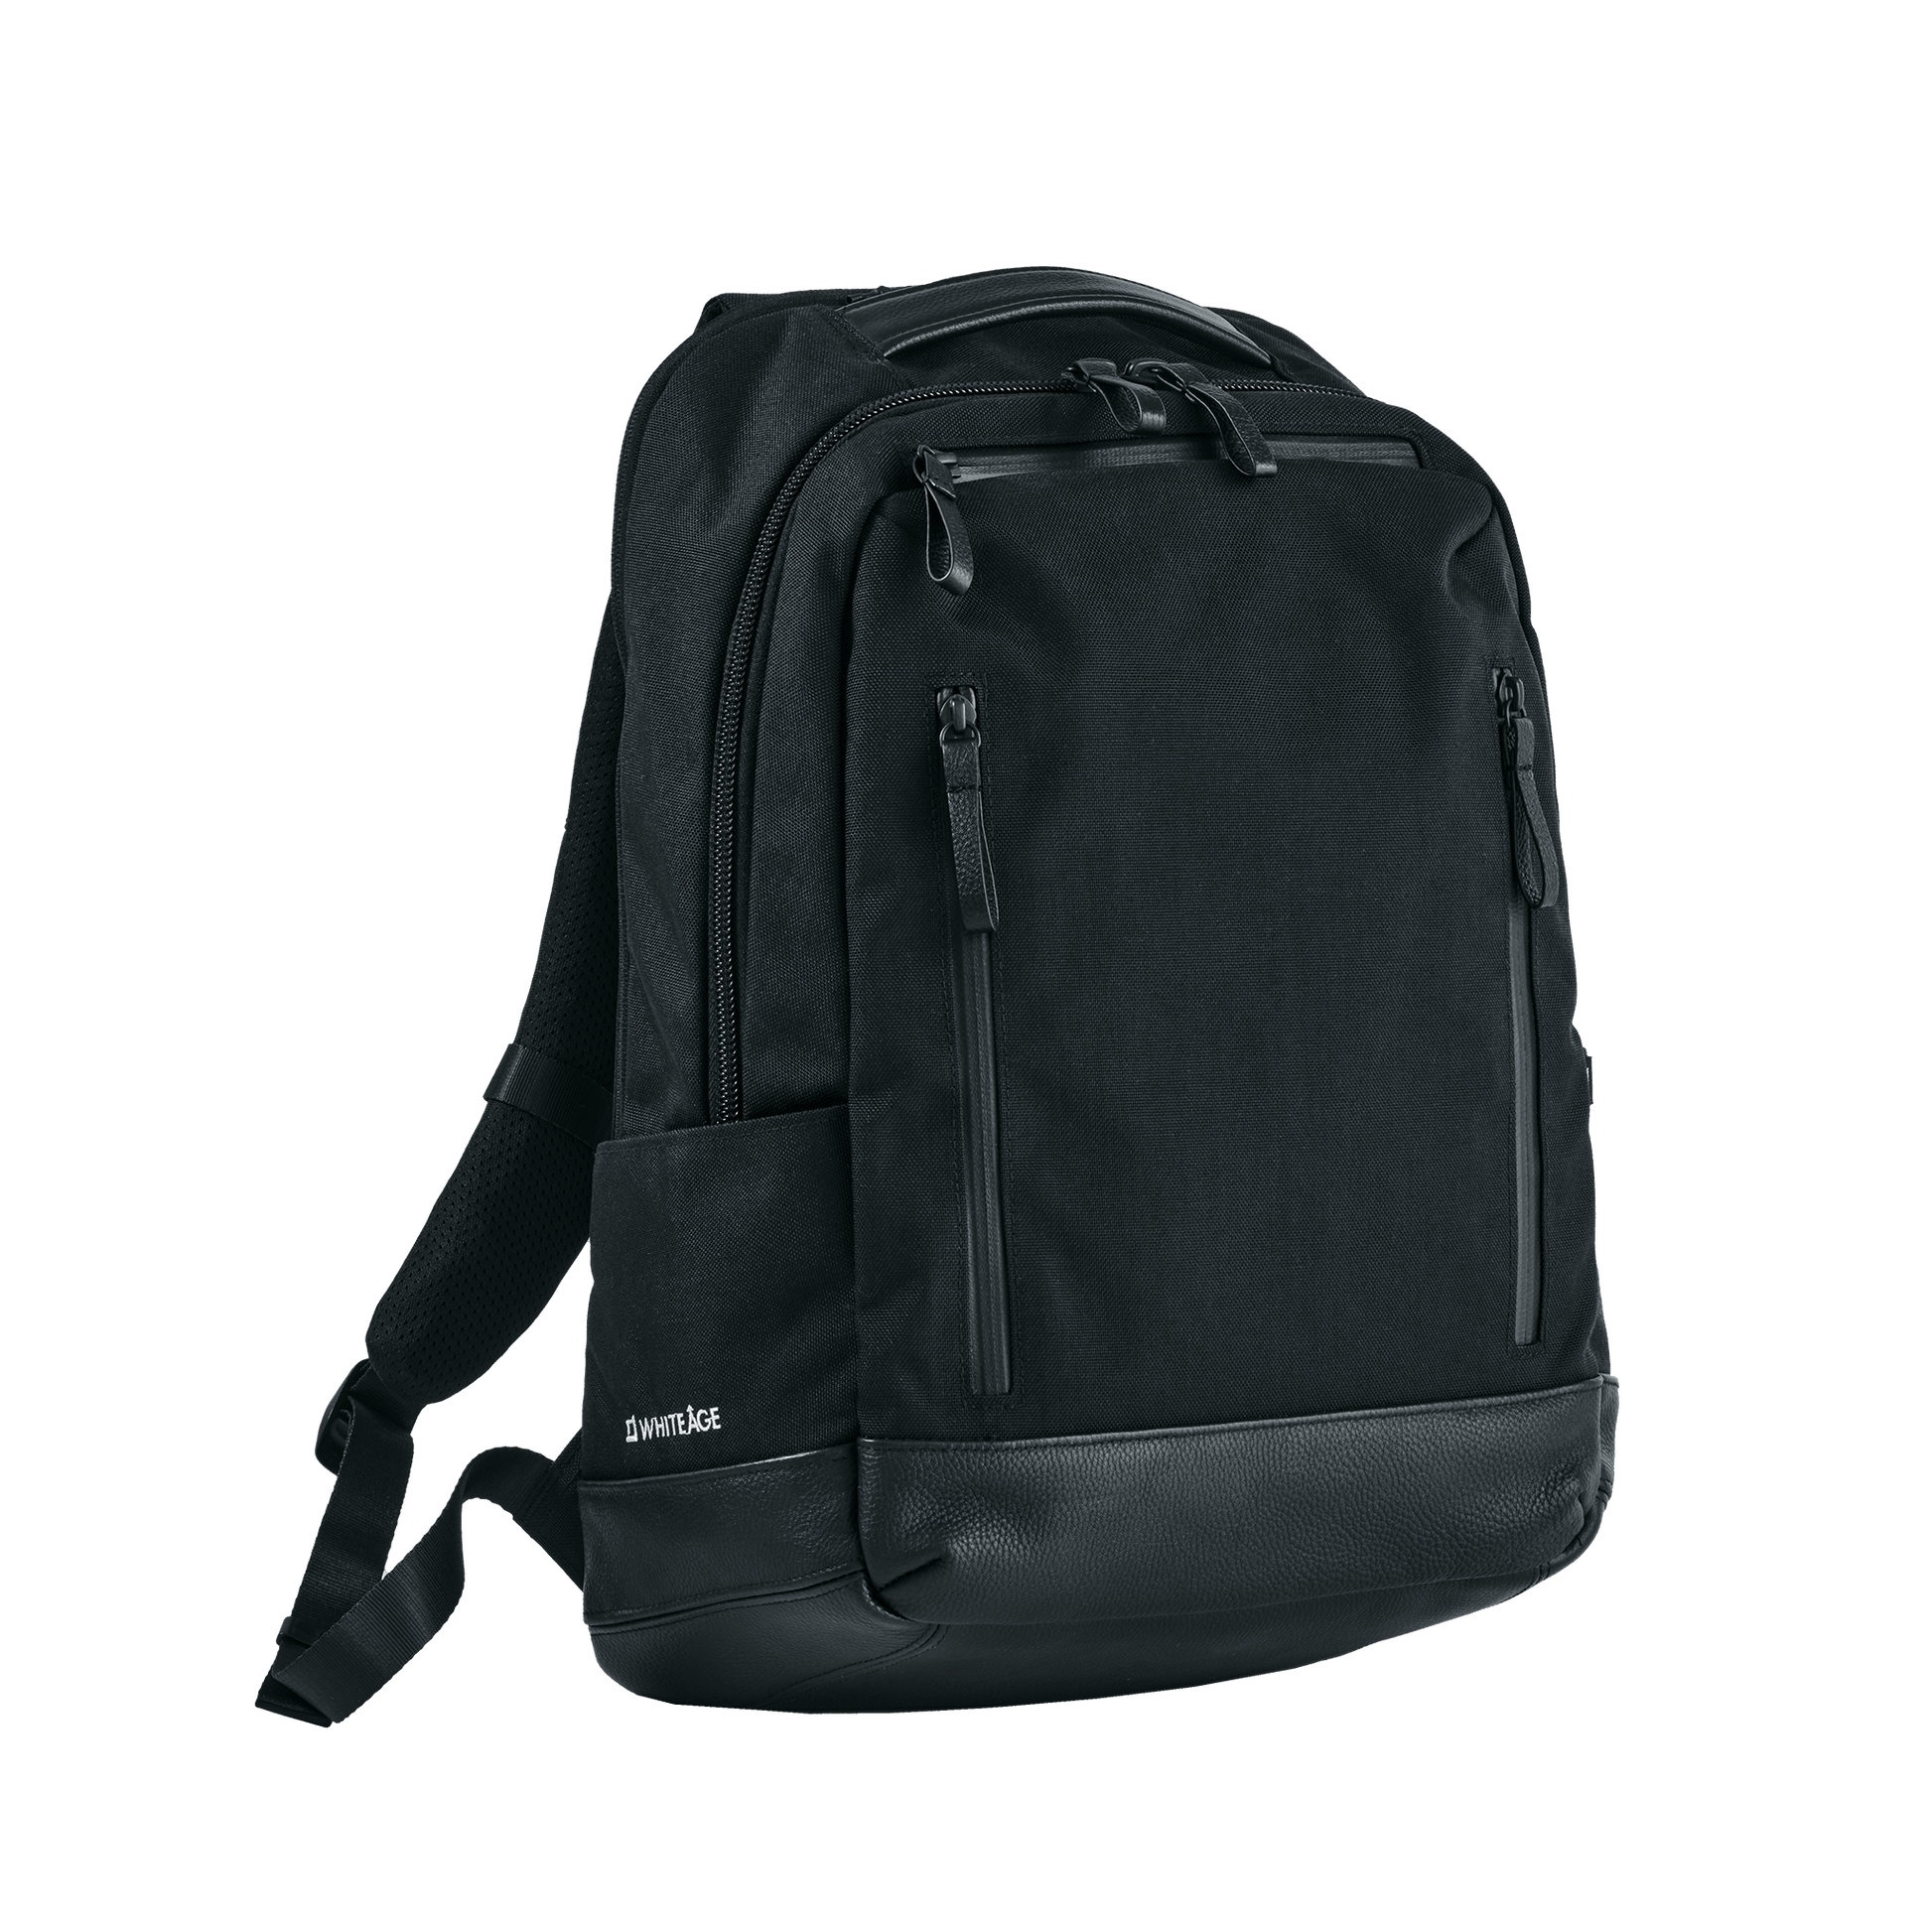 GEX Backpack L | WHITEÂGE(ホワイタージュ) ONLINE STORE (公式）